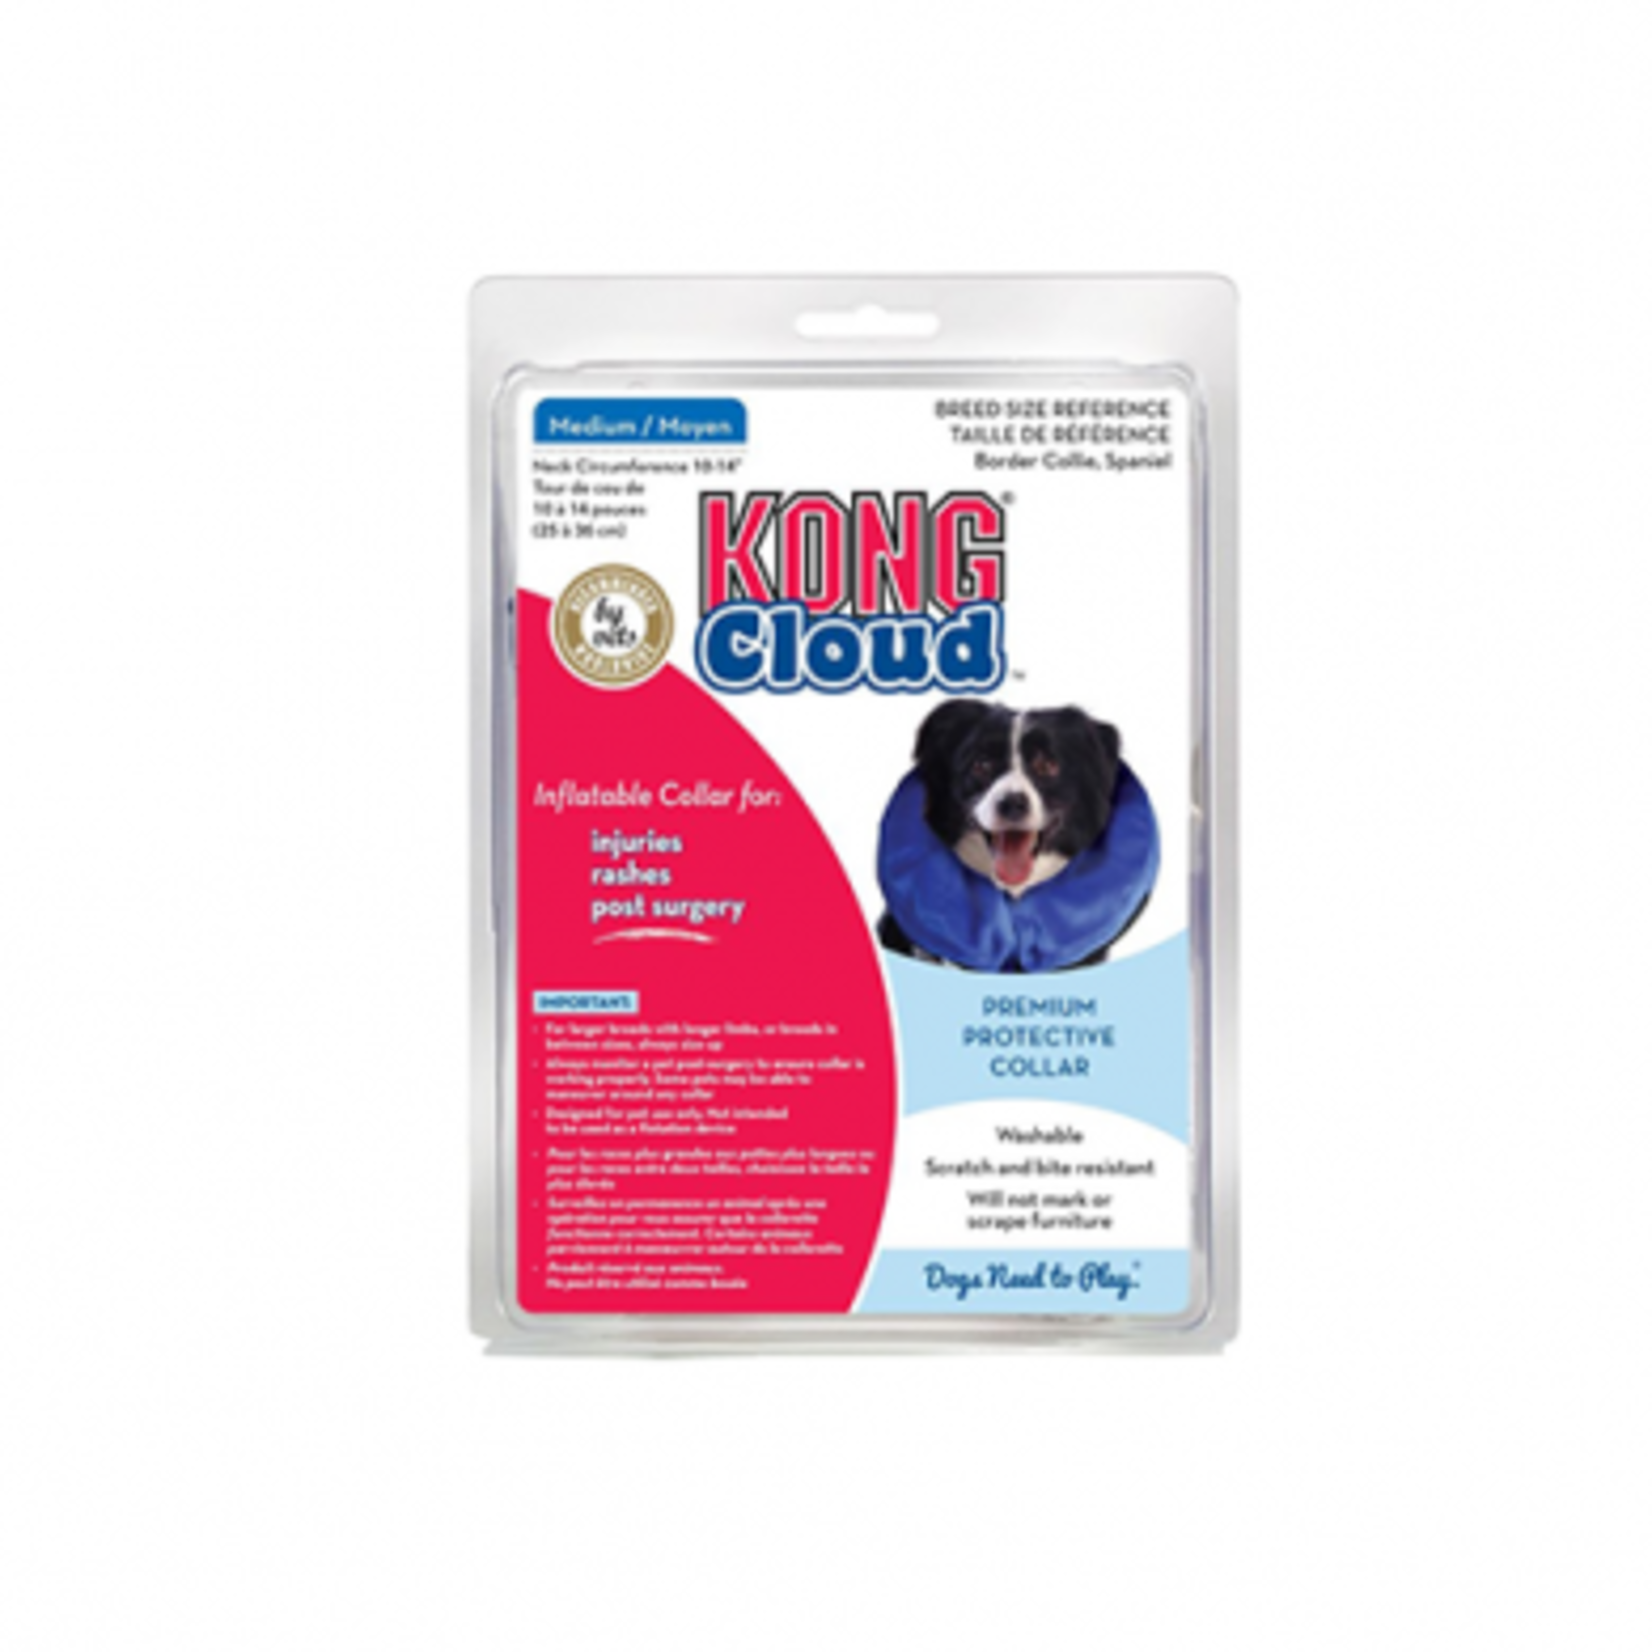 Kong Cloud Collar for Dogs